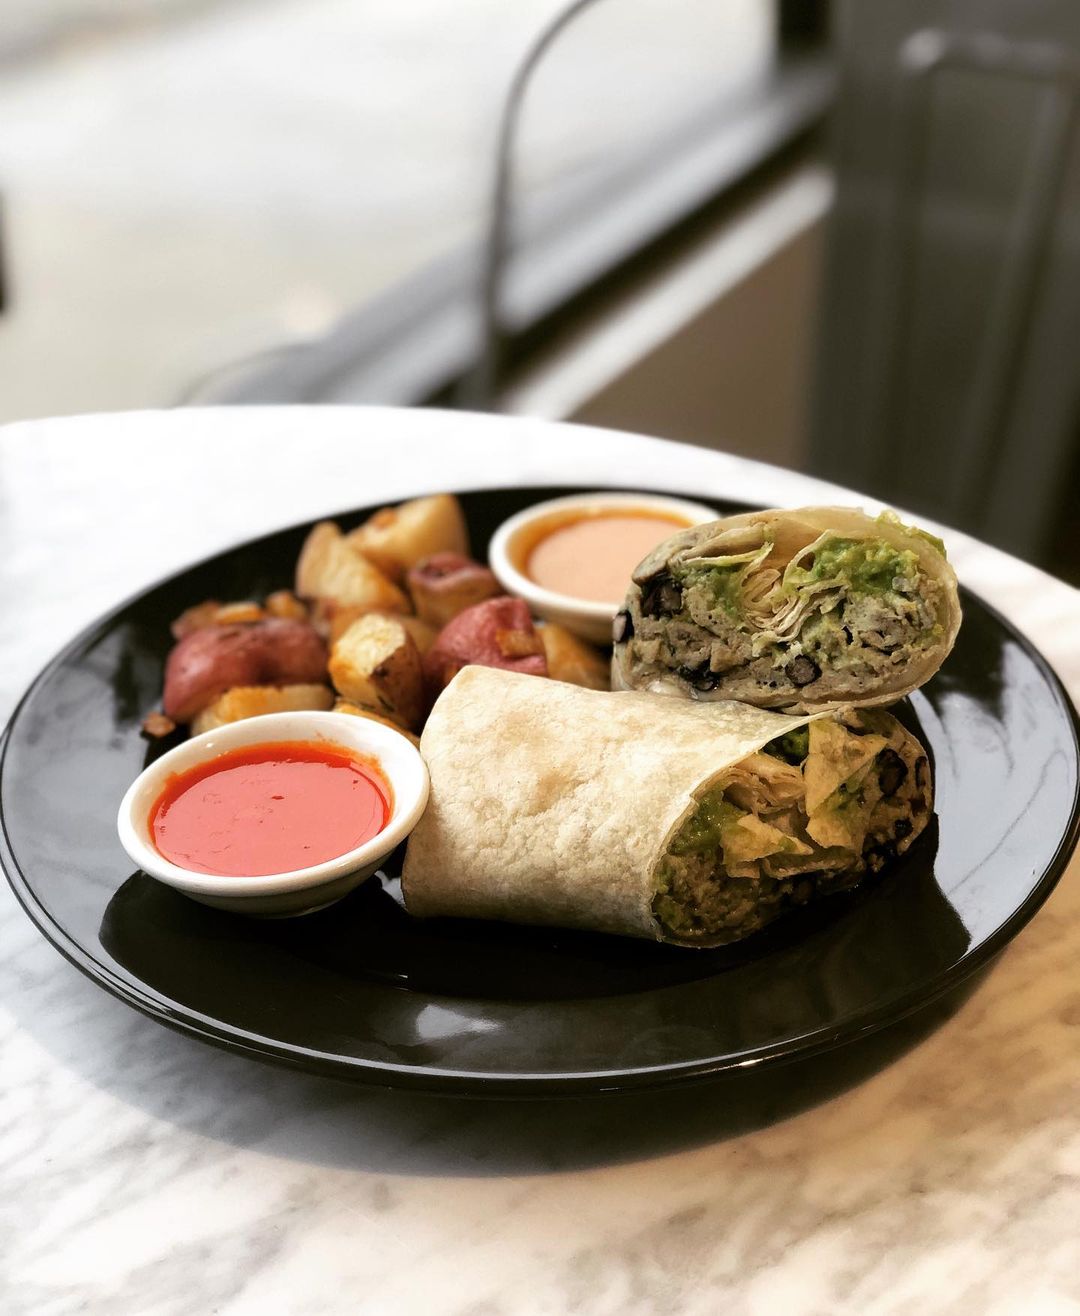 Breakfast wrap with rosemary roasted potatoes and fresno chili hot sauce on a plate. Photo by Instagram username @petitcafeoak